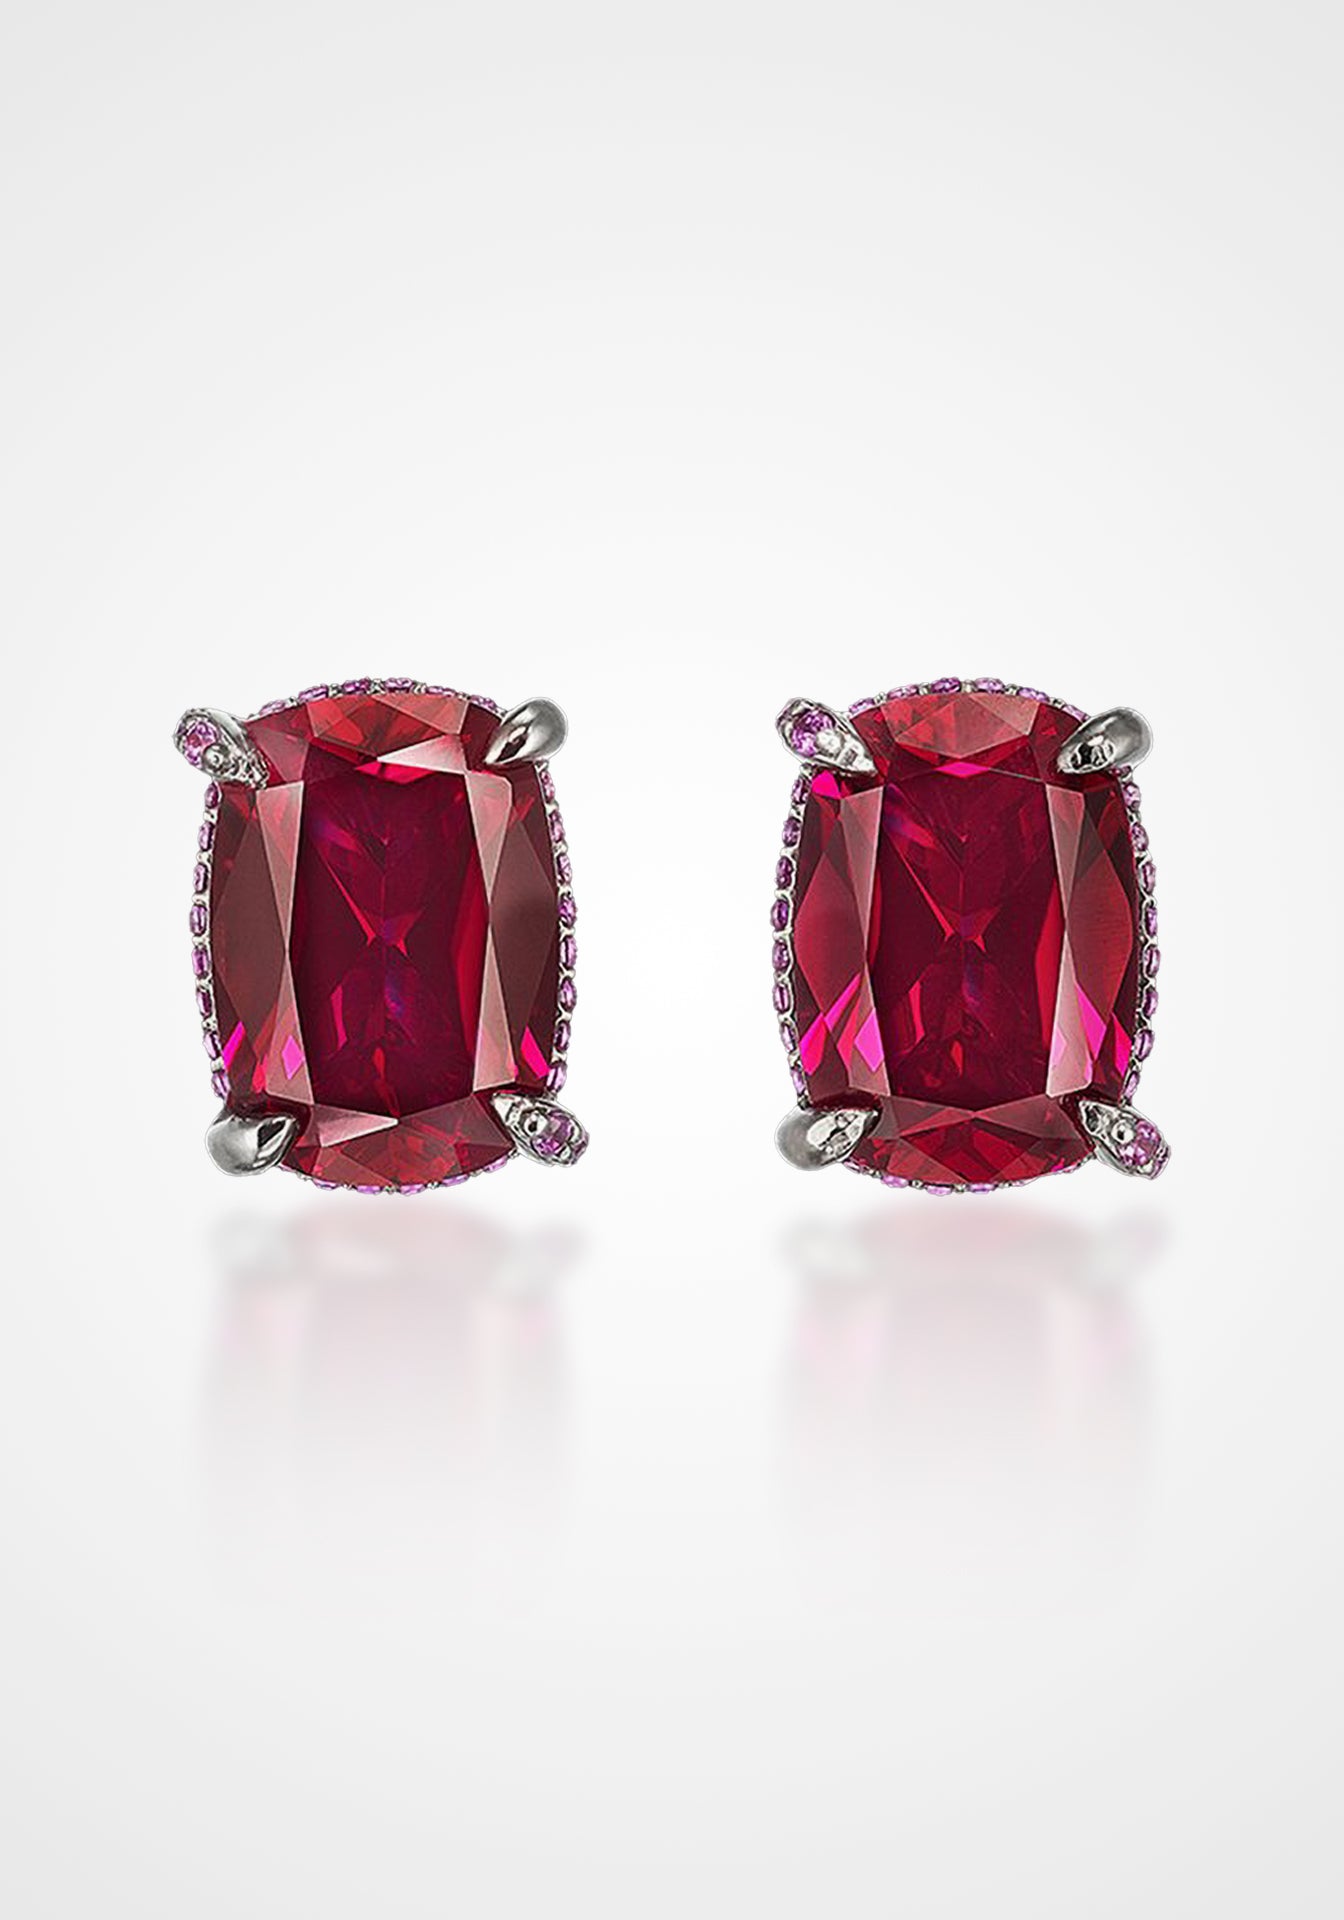 Cushion Wing, 18K White Gold + Ruby Studs